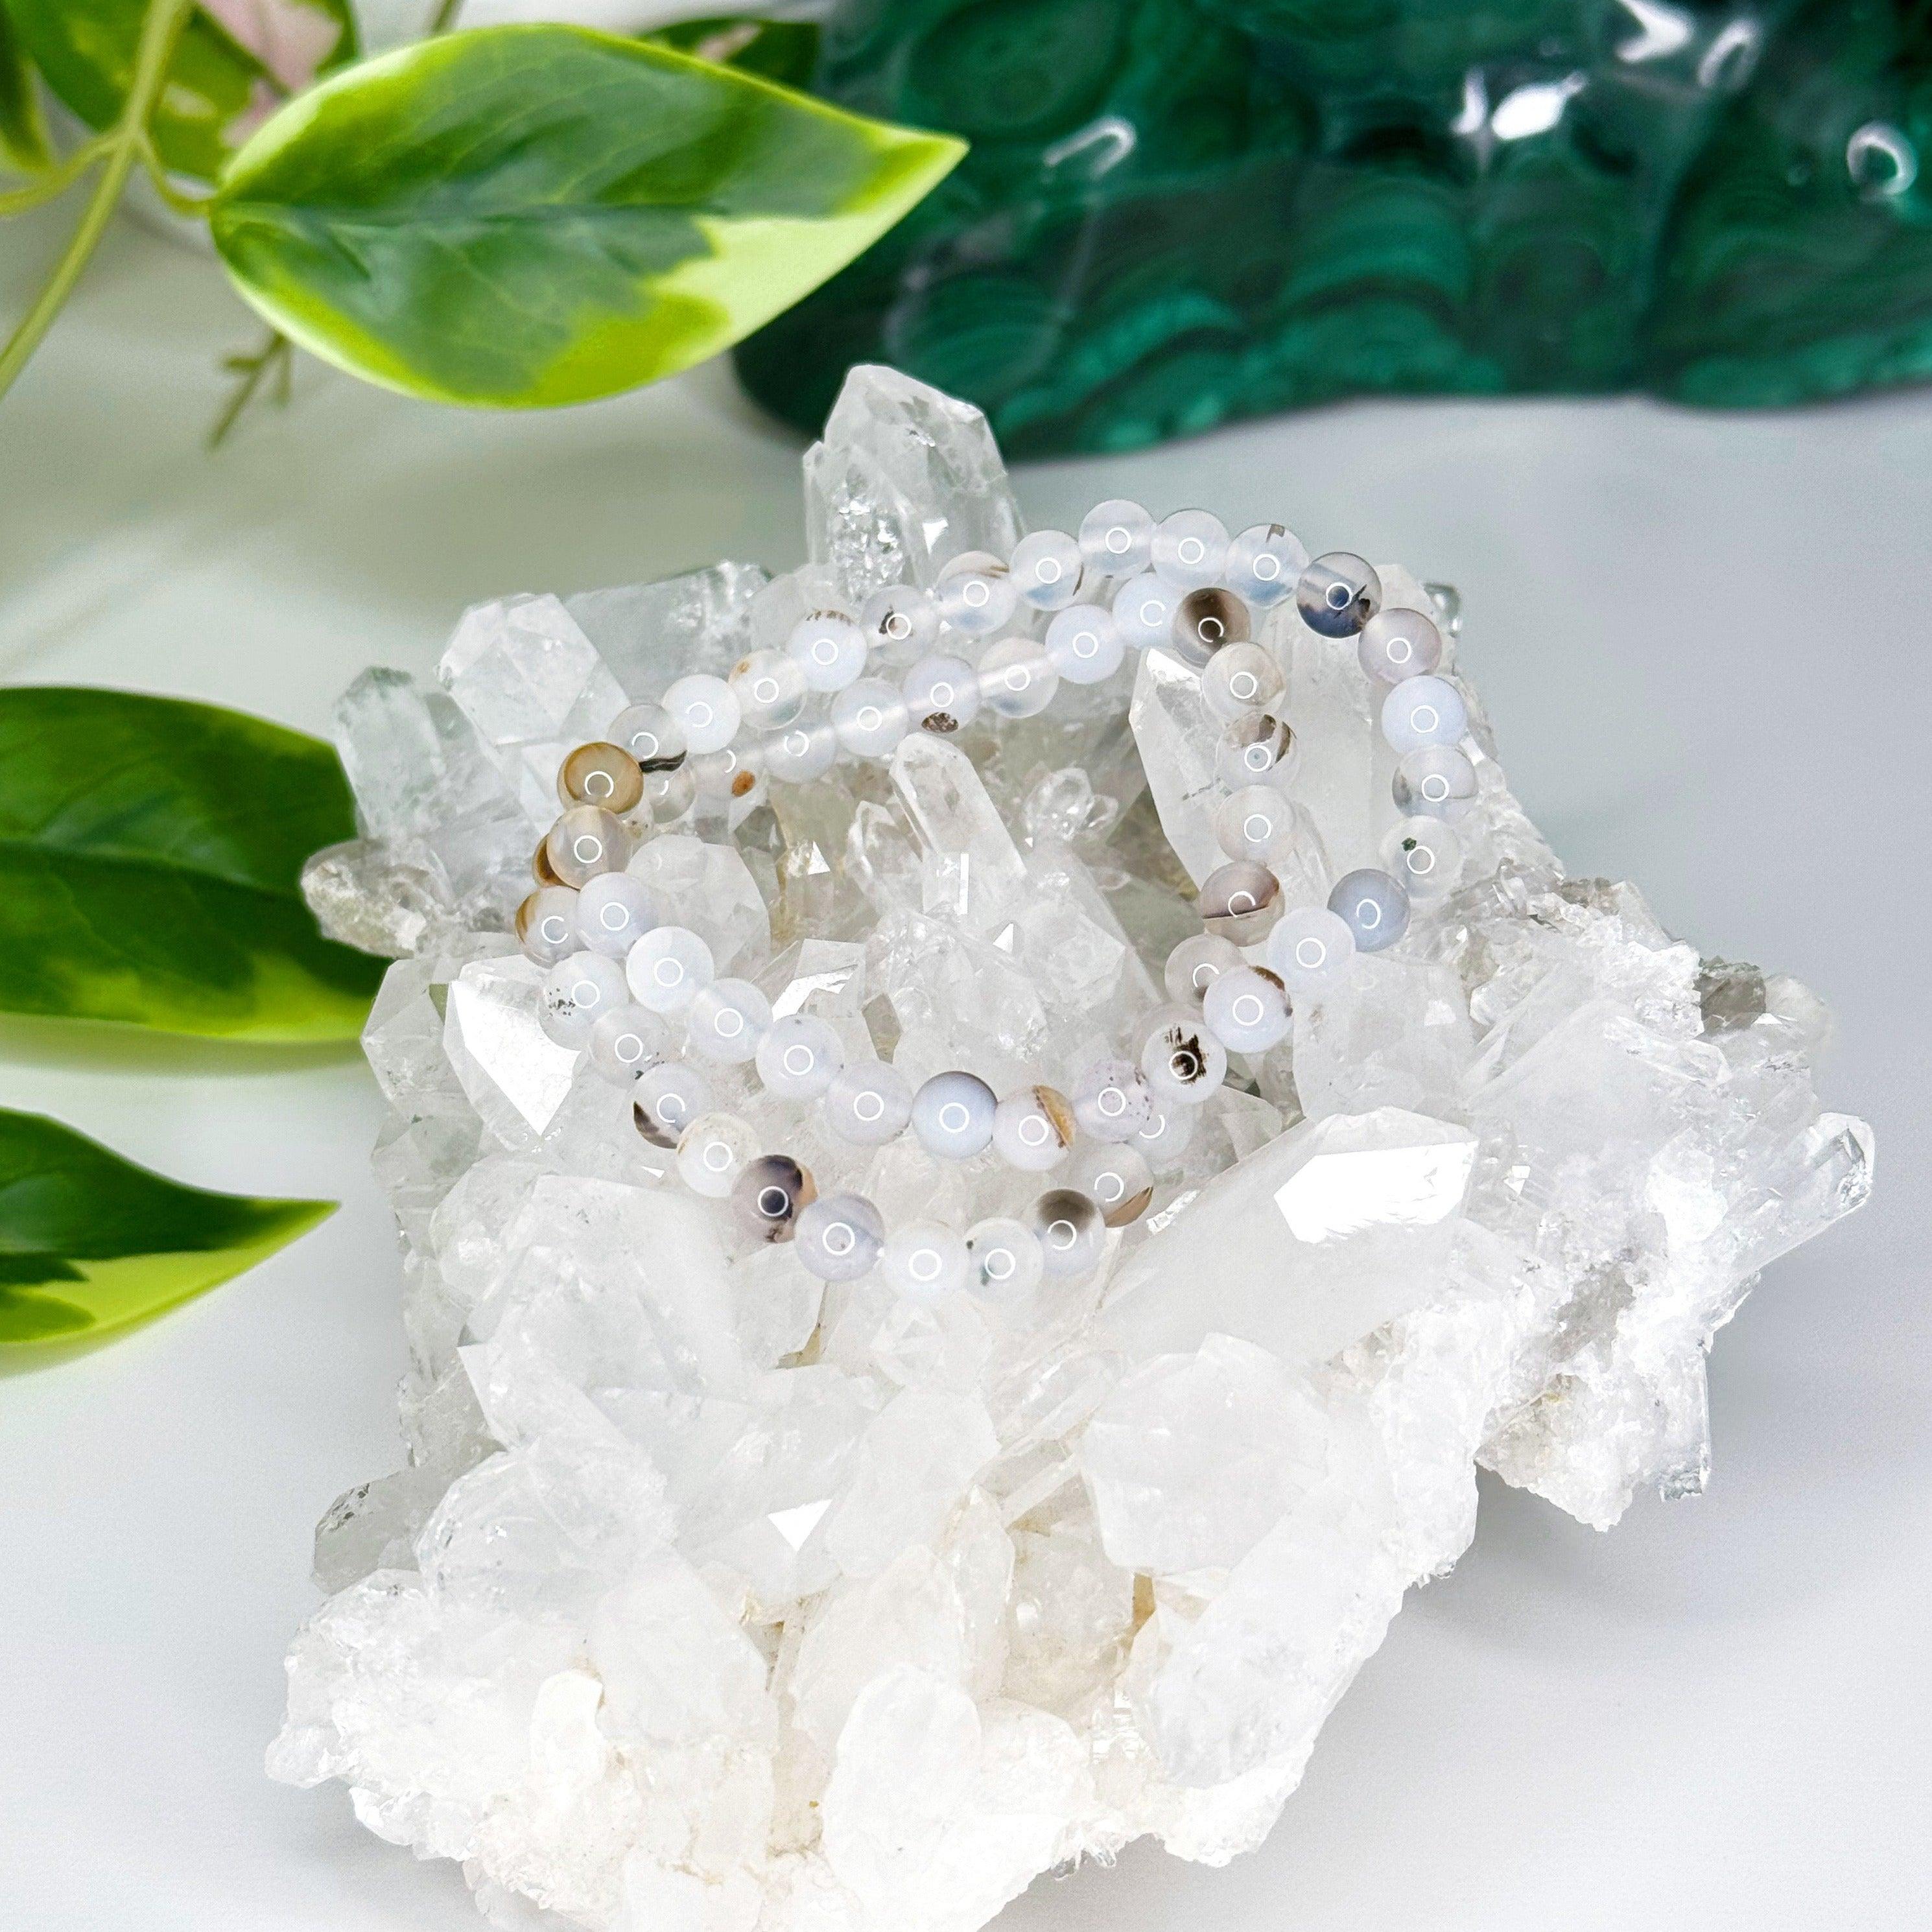 MONTANA AGATE 6mm - HANDMADE CRYSTAL BRACELET - 6mm, agate, bracelet, clear/white, crystal bracelet, dendritic agate, emotional support, focus gift bundle, handmade bracelet, jewelry, joy gift bundle, market bracelet, montana agate, recently added, Wearable, white, white agate, winter collection, winter solstice collection - The Mineral Maven